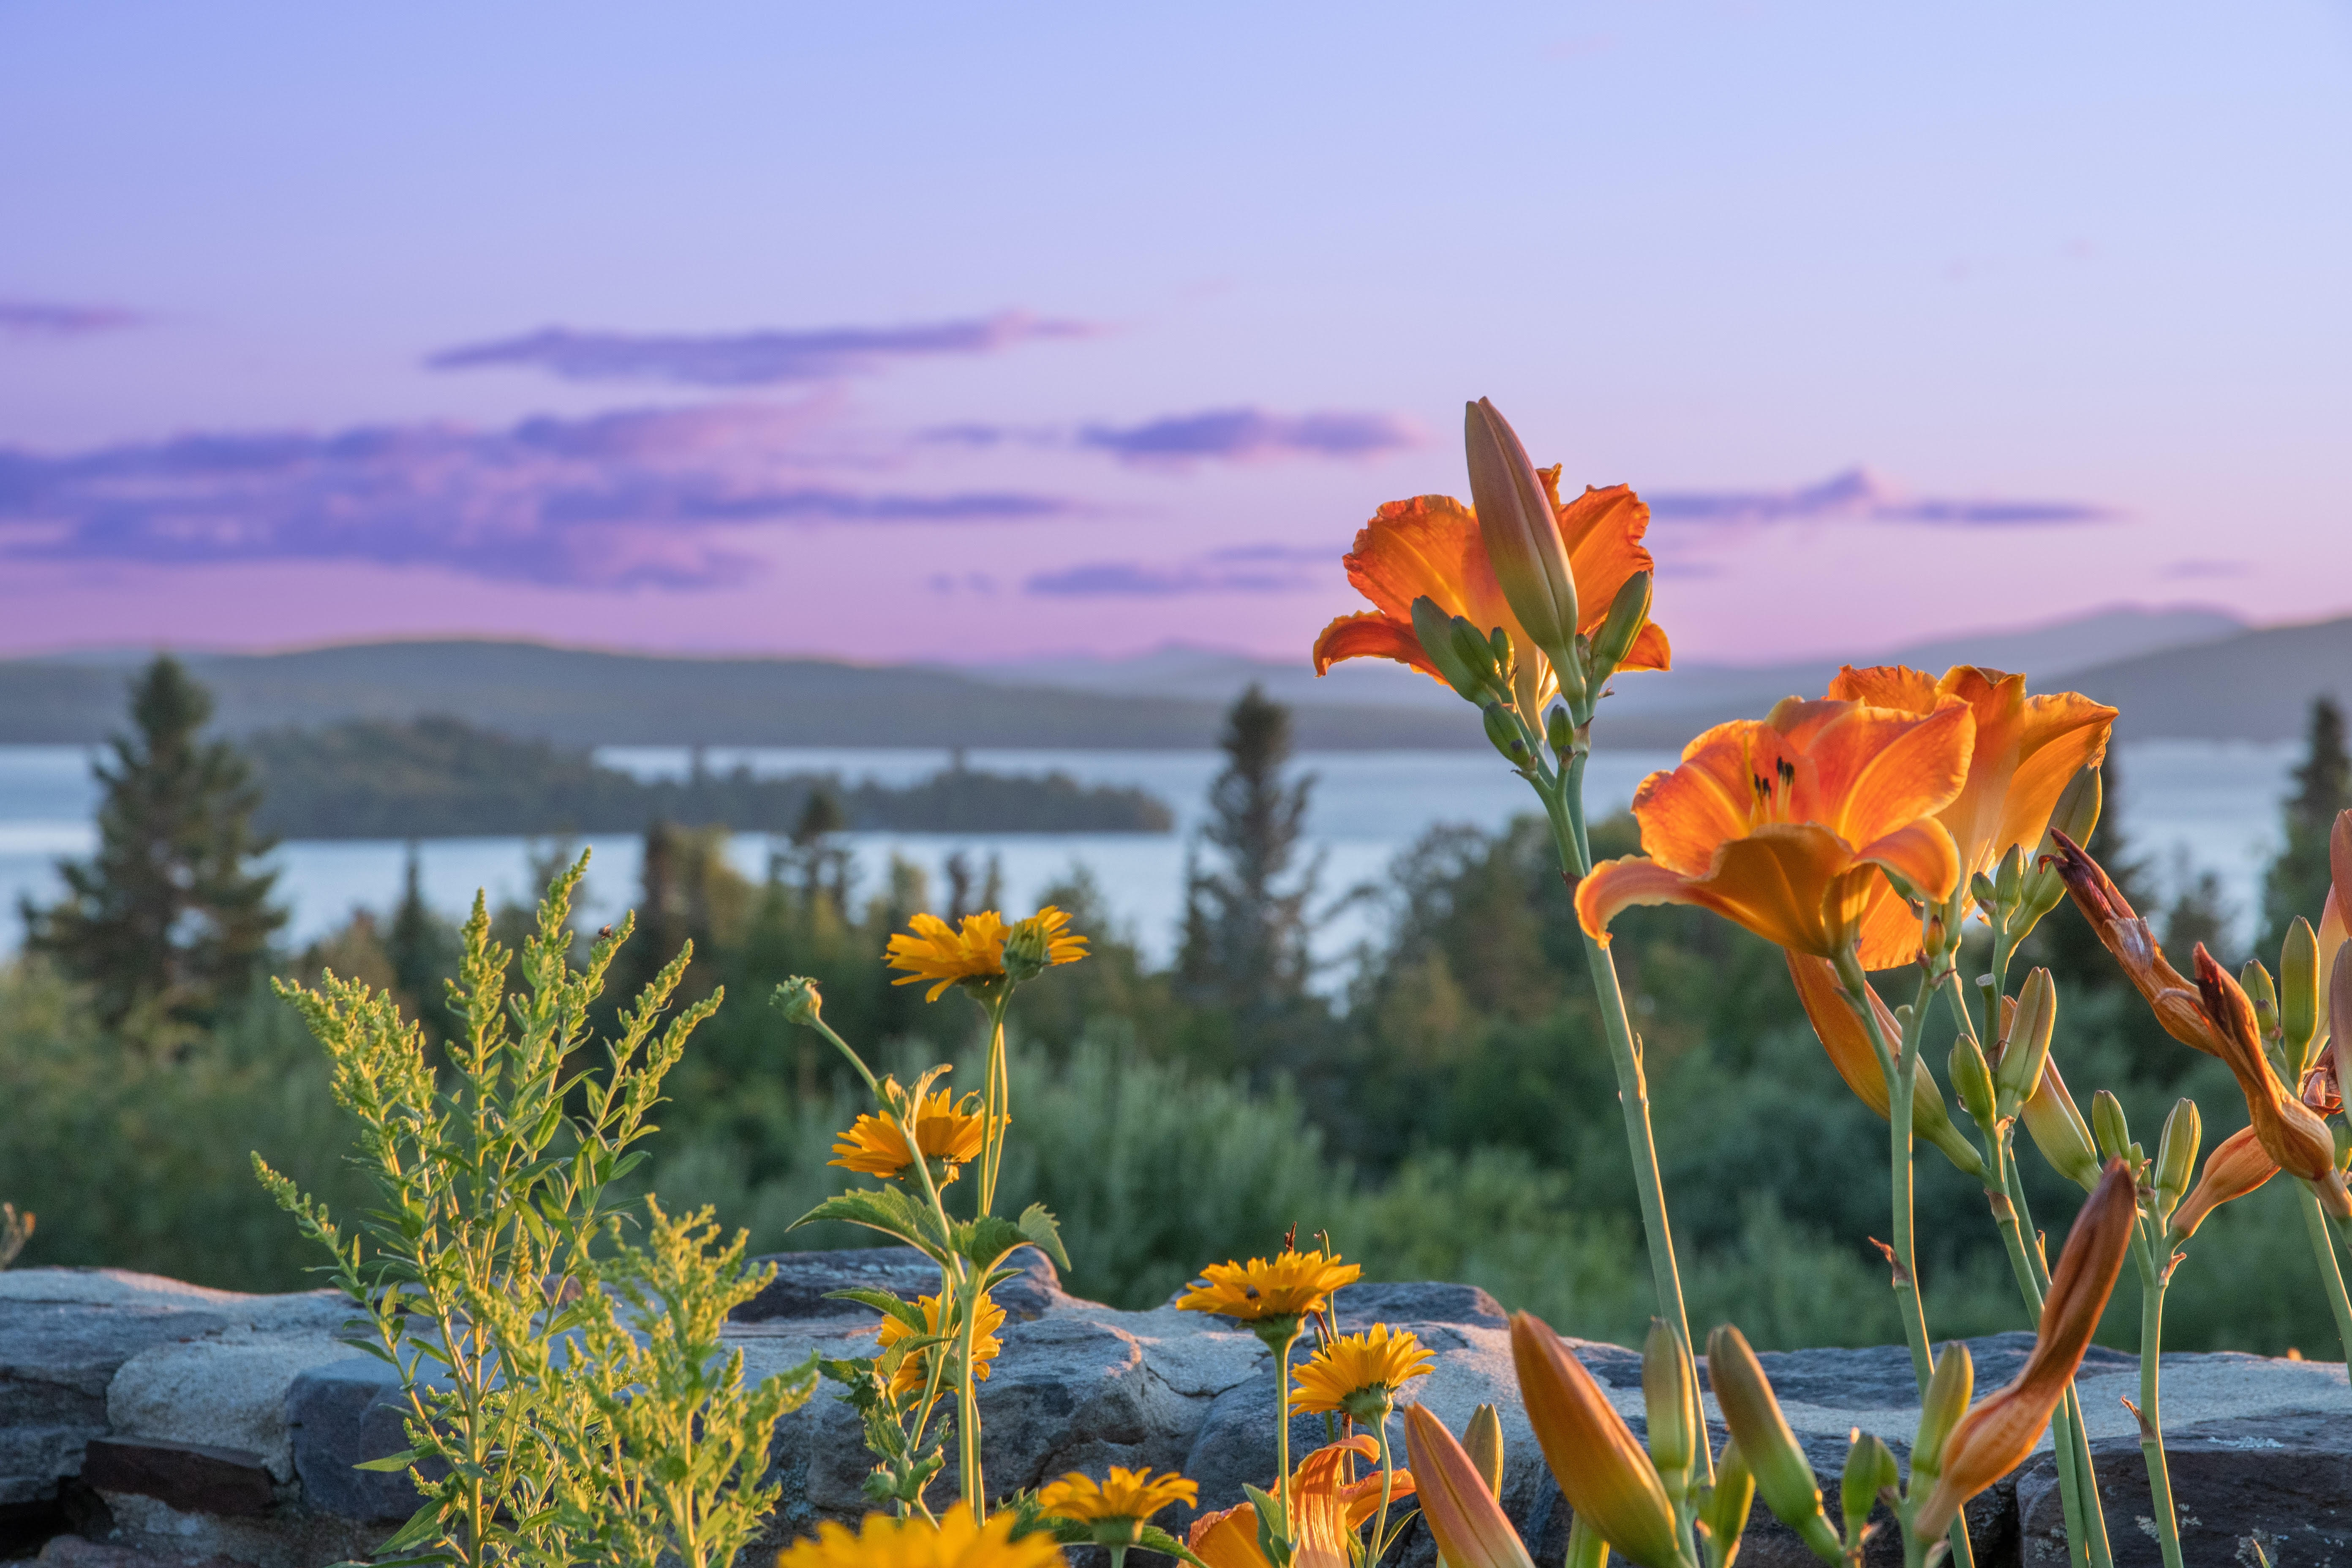 Picture with orange day lilies and other flowers in the front with Rangeley Lake in the background.